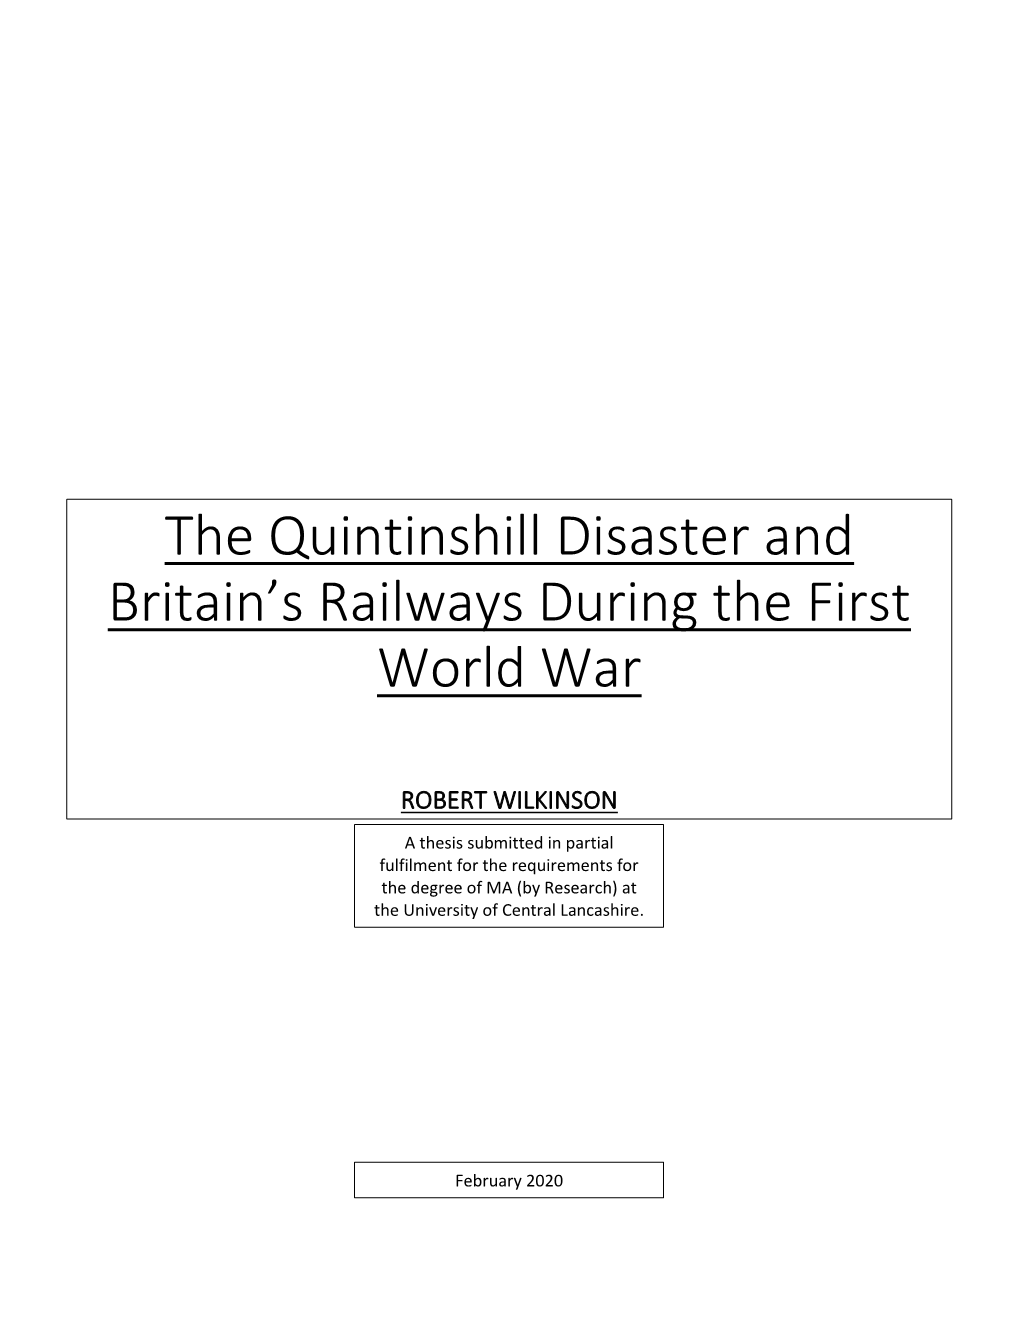 The Quintinshill Disaster and Britain's Railways During the First World